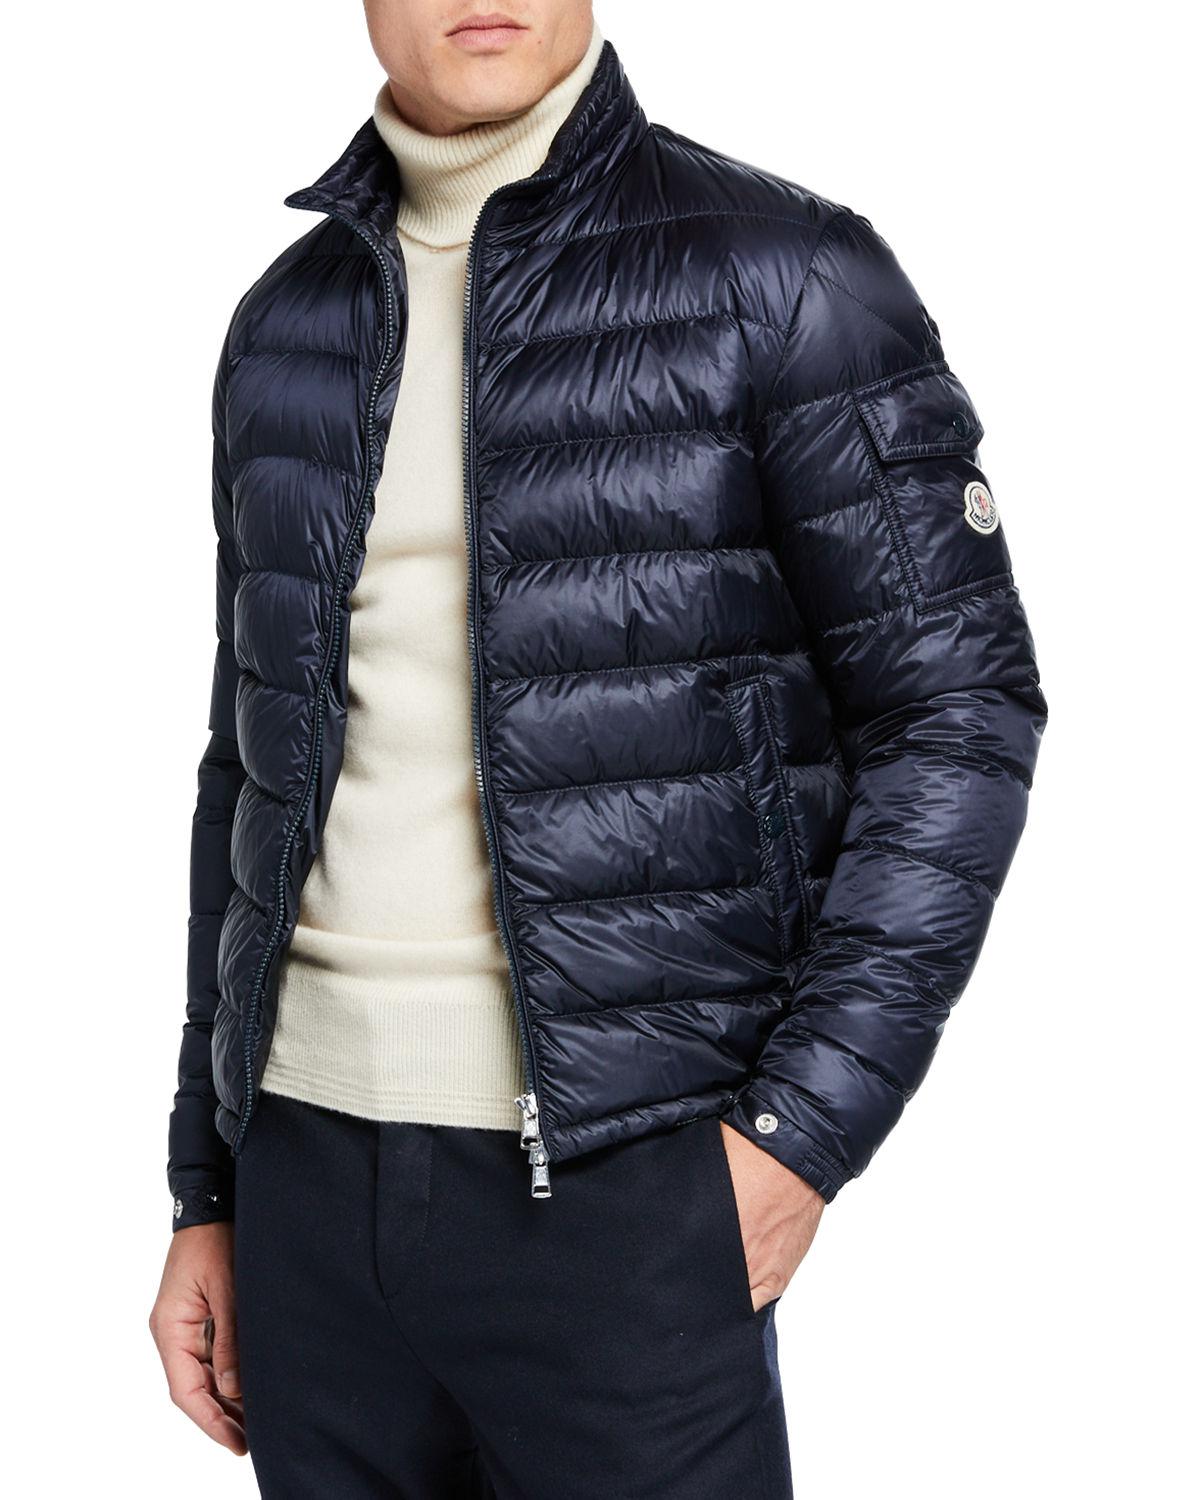 moncler animal fur Cheaper Than Retail Price> Buy Clothing, Accessories